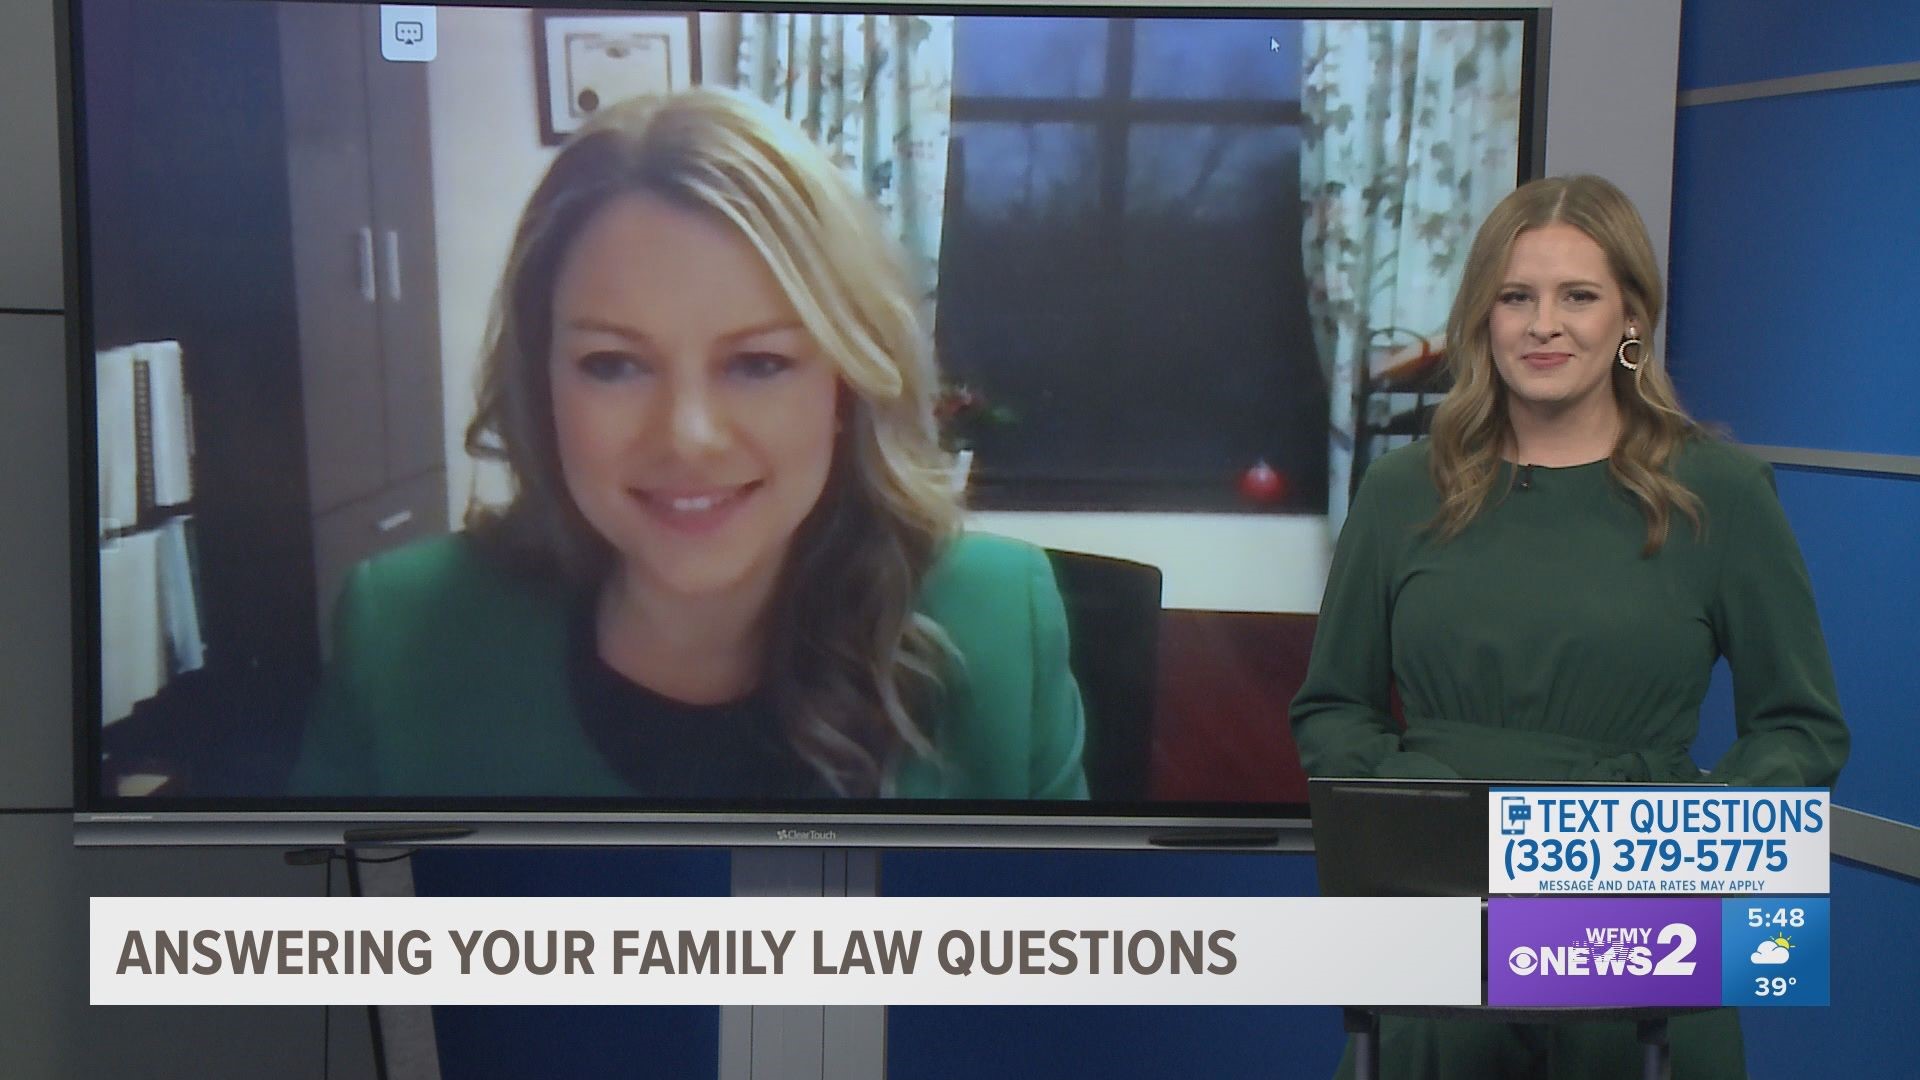 Family law specialist Hillary Hux answers some of the top questions about family law and how you can navigate different situations.